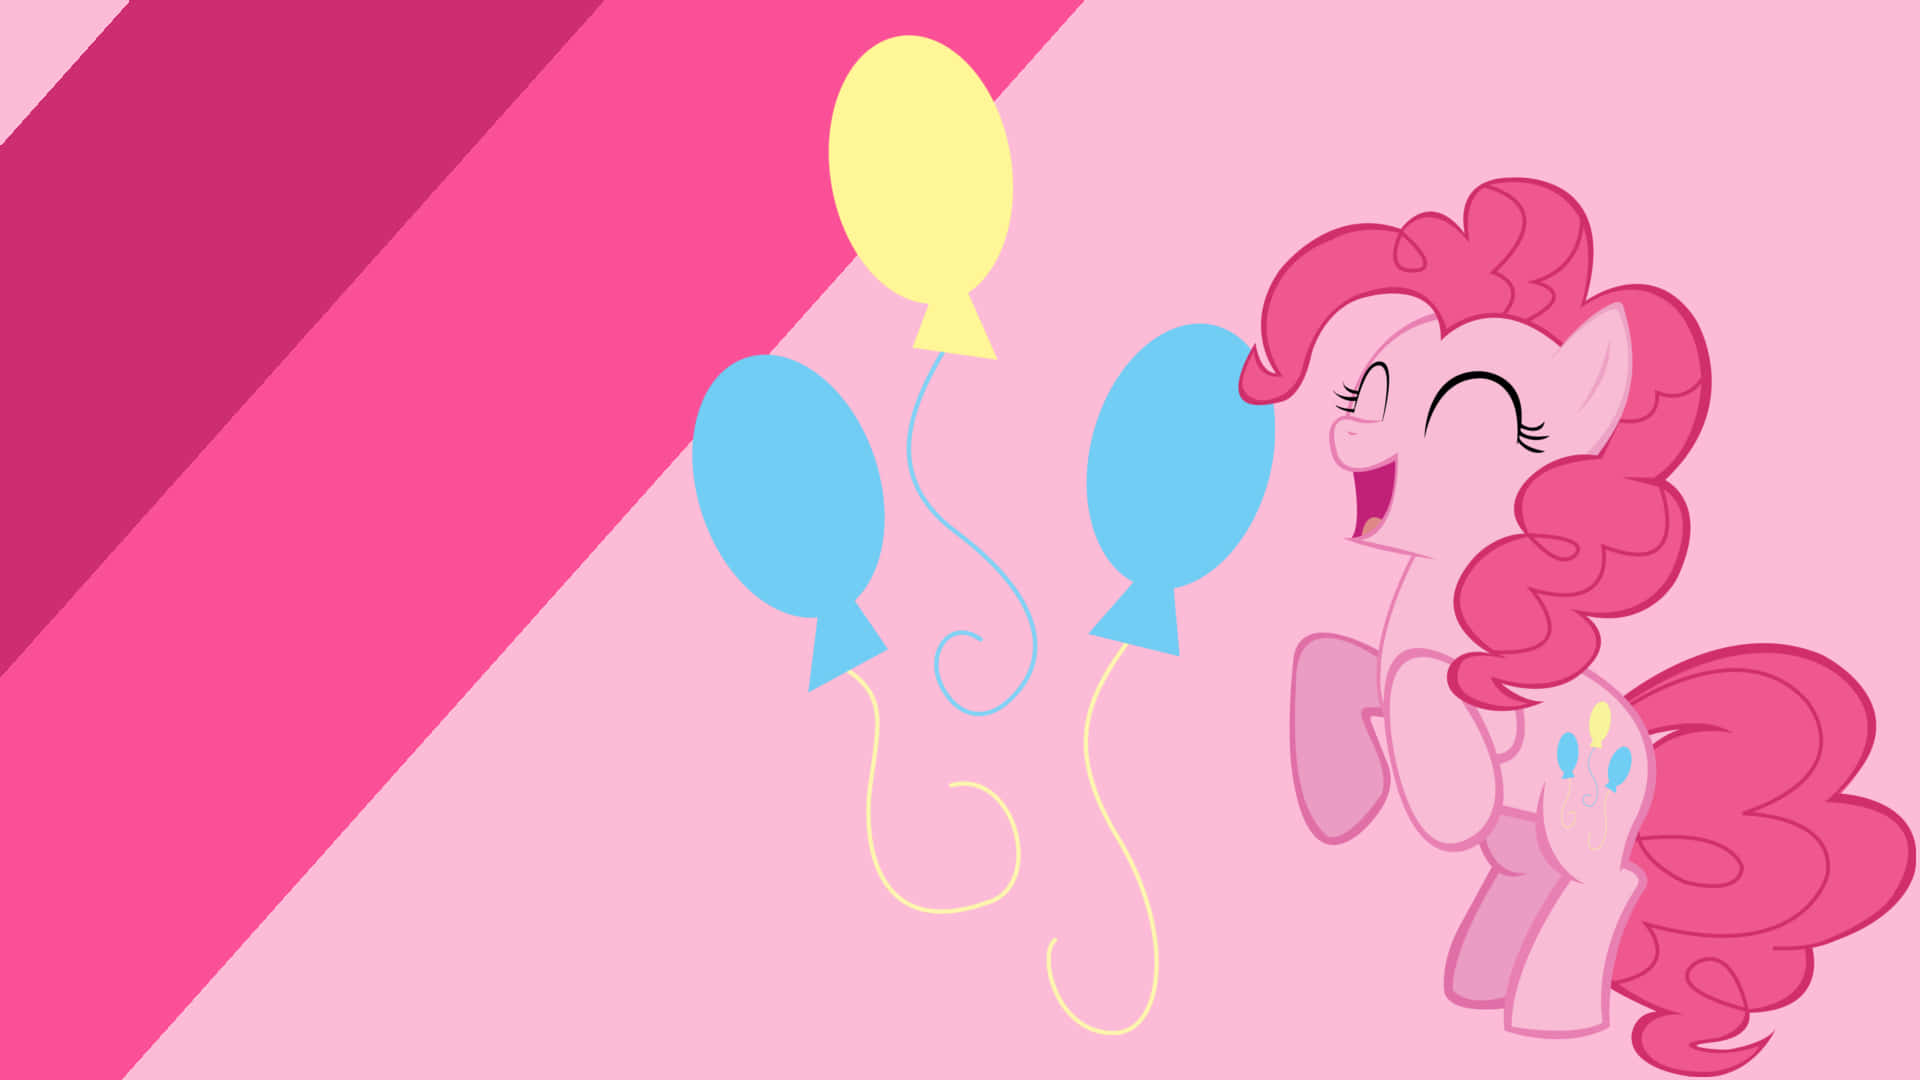 Pinkie Pie, the cheerful and cheerful pink pony